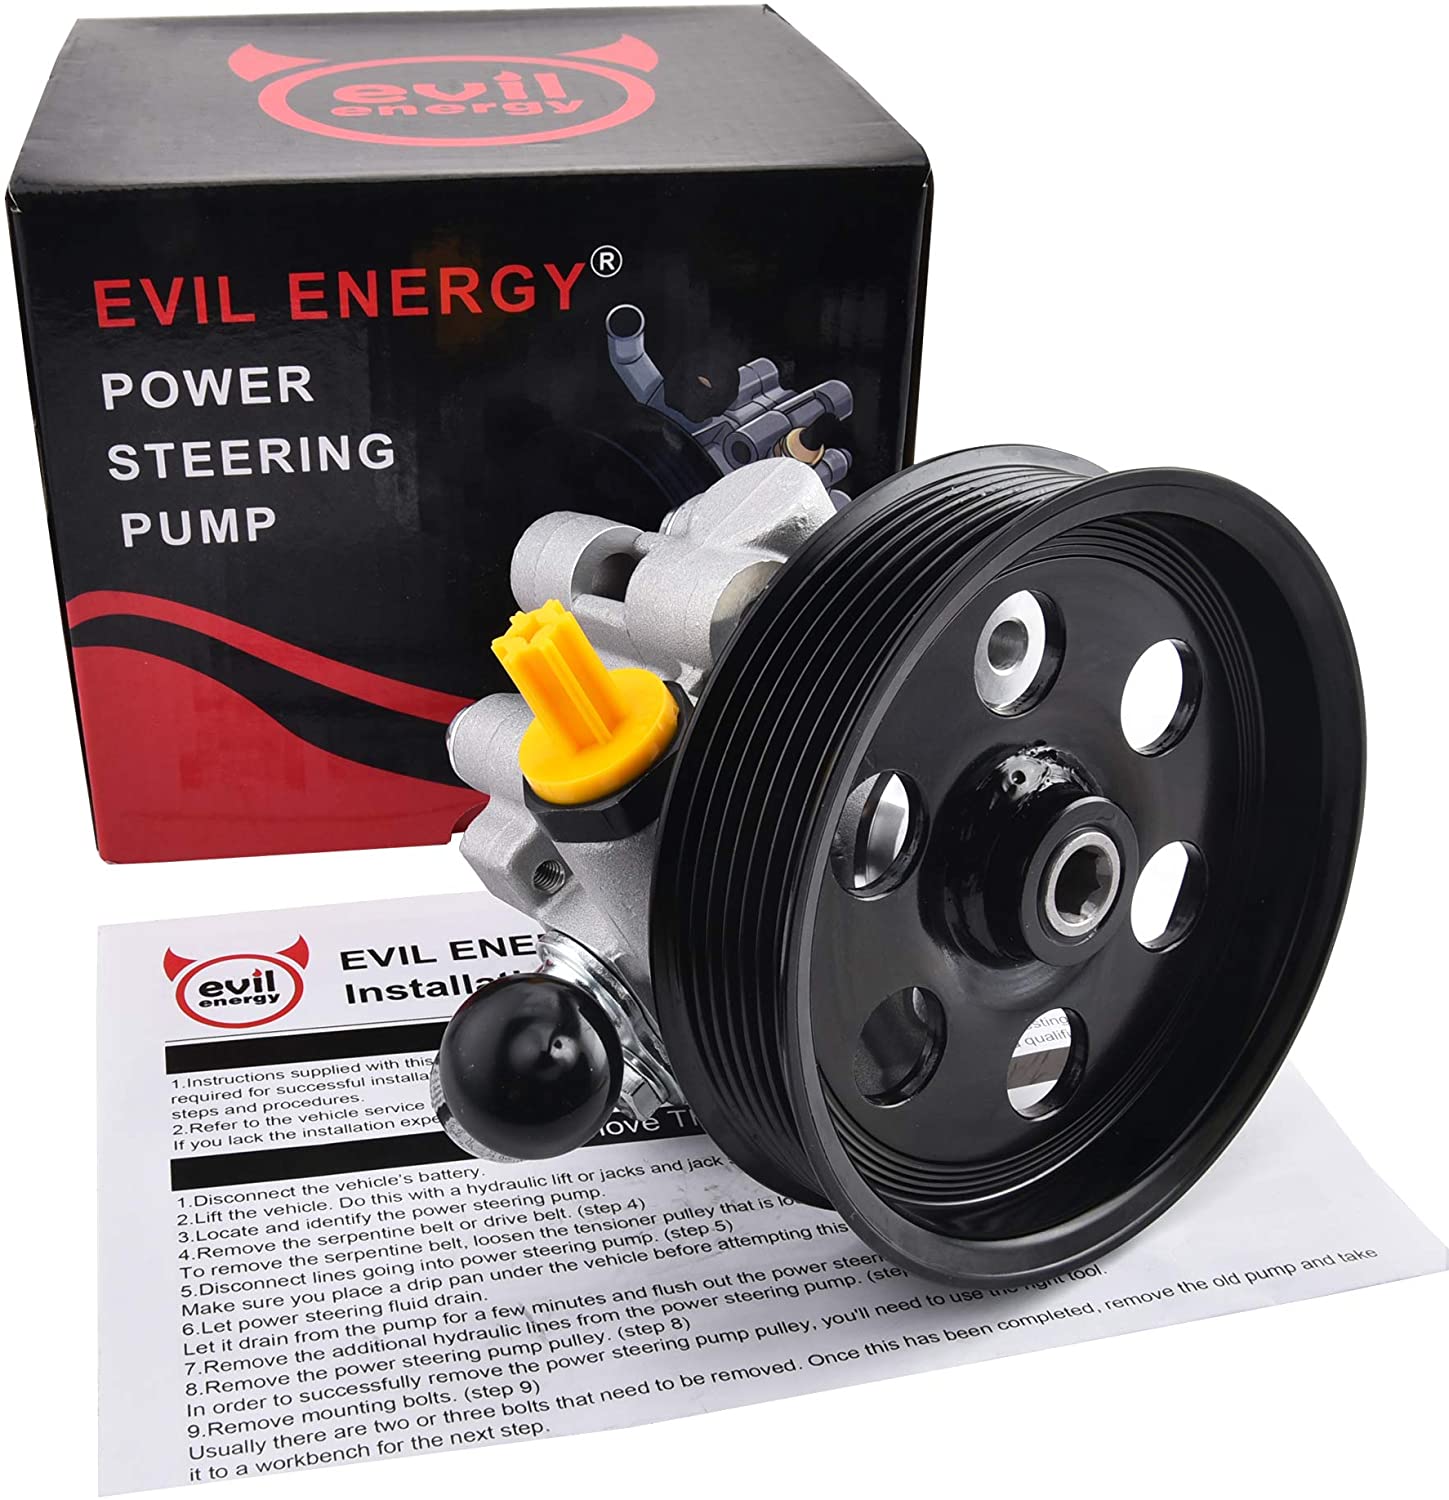 EVIL ENERGY Power Steering Pump With Pulley Compatible With 2005-2010 Chrysler 300 2009-2010 Dodge Challenger 2006-2010 Dodge Charger Replacement for 21-5445 960-5445